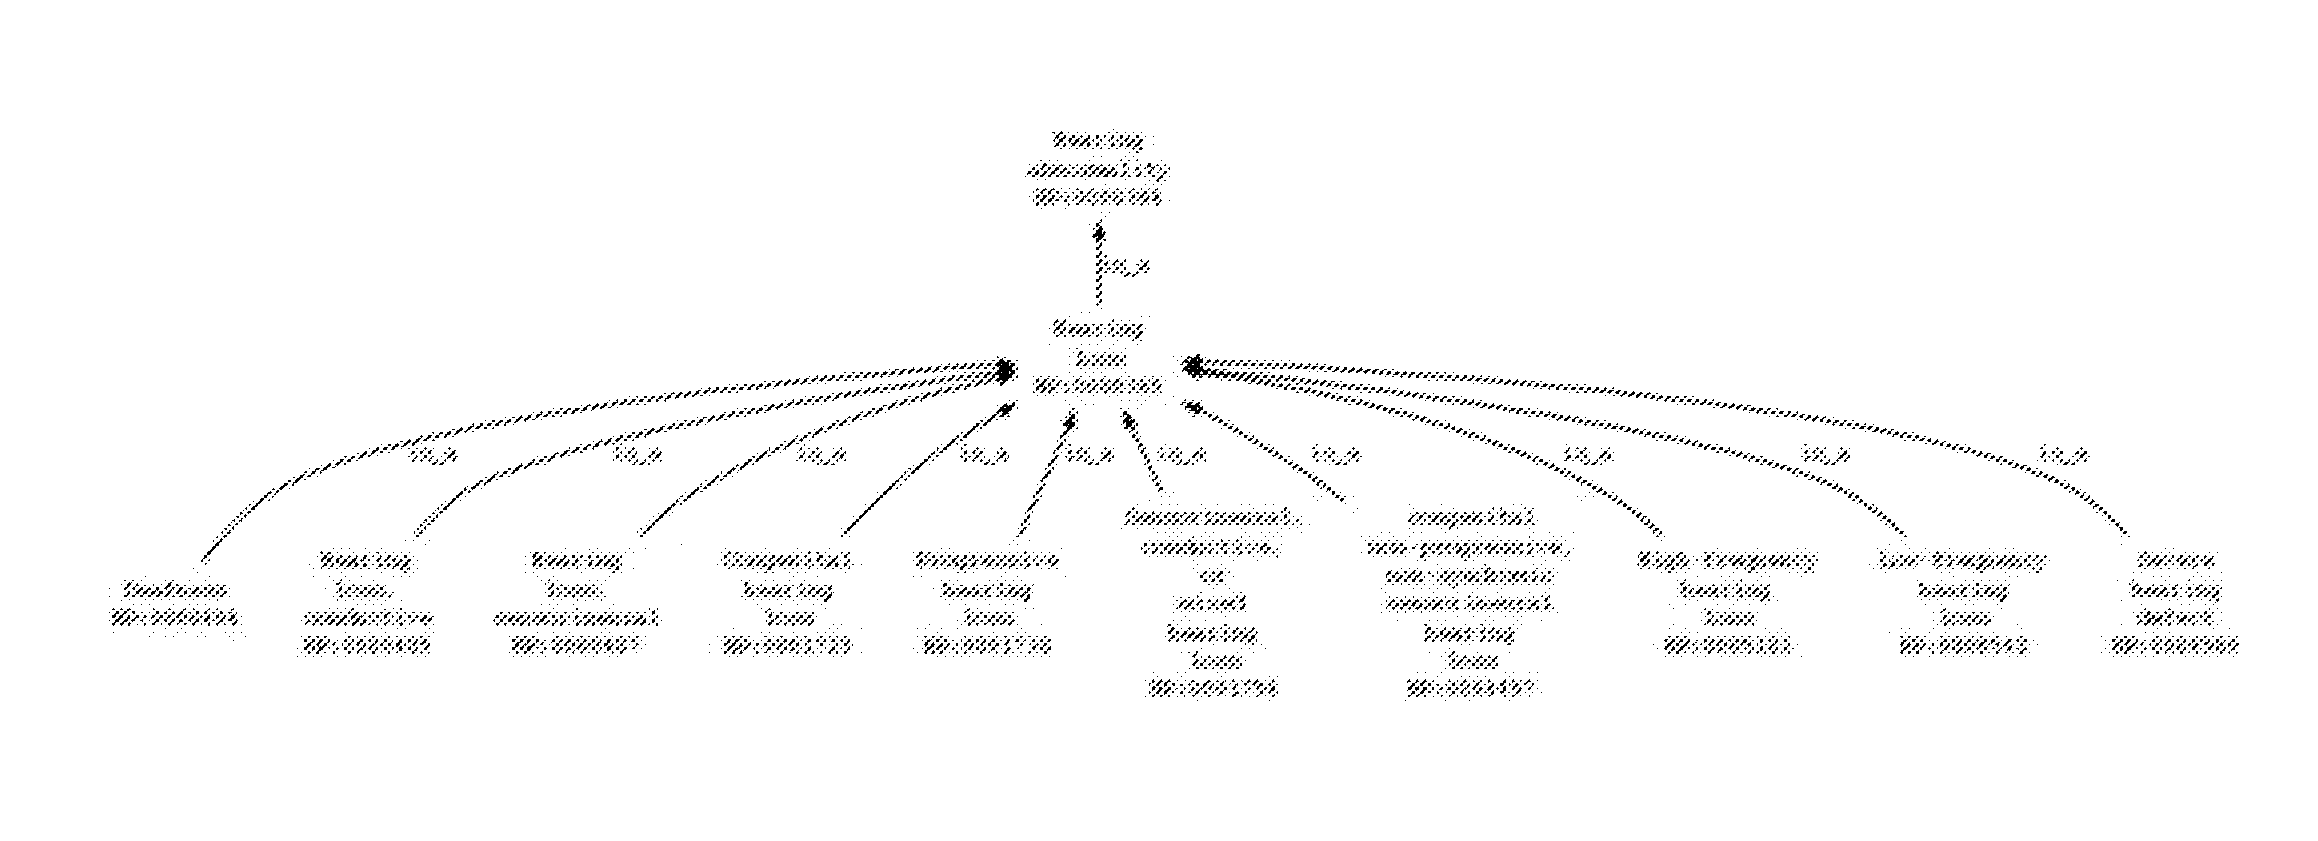 System and Methods for Personalized Clinical Decision Support Tools